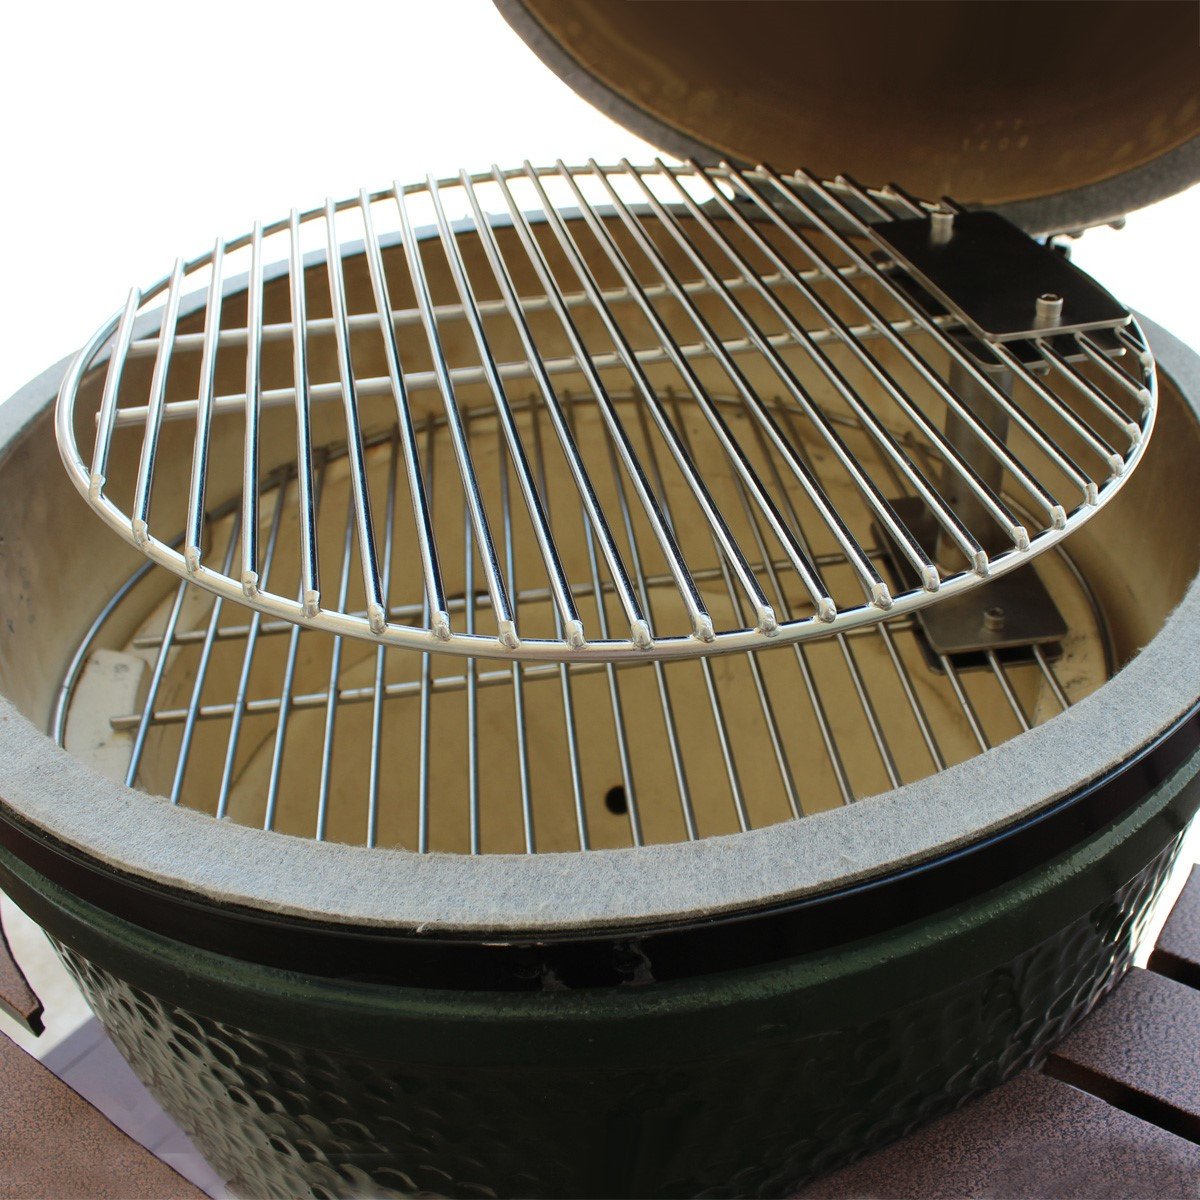 Grate Stacker + Grill Grate COMBO - Large